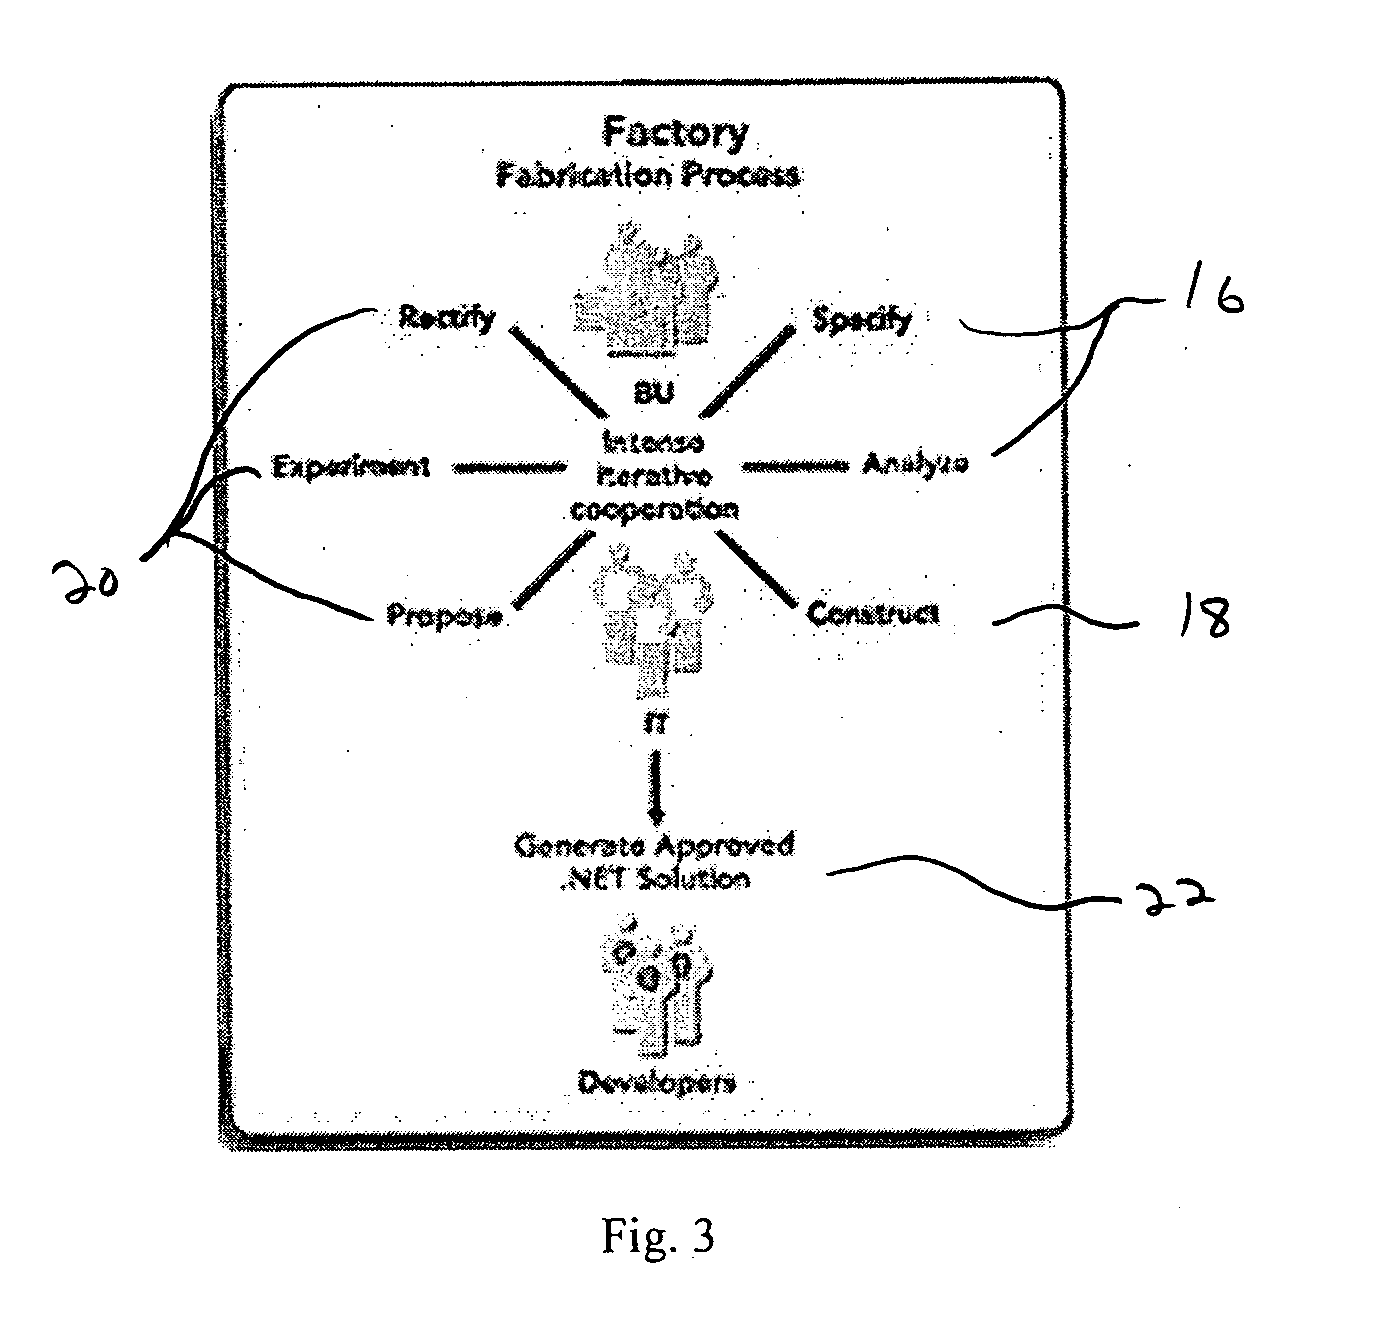 Distributed software fabrication system and process for fabricating business applications